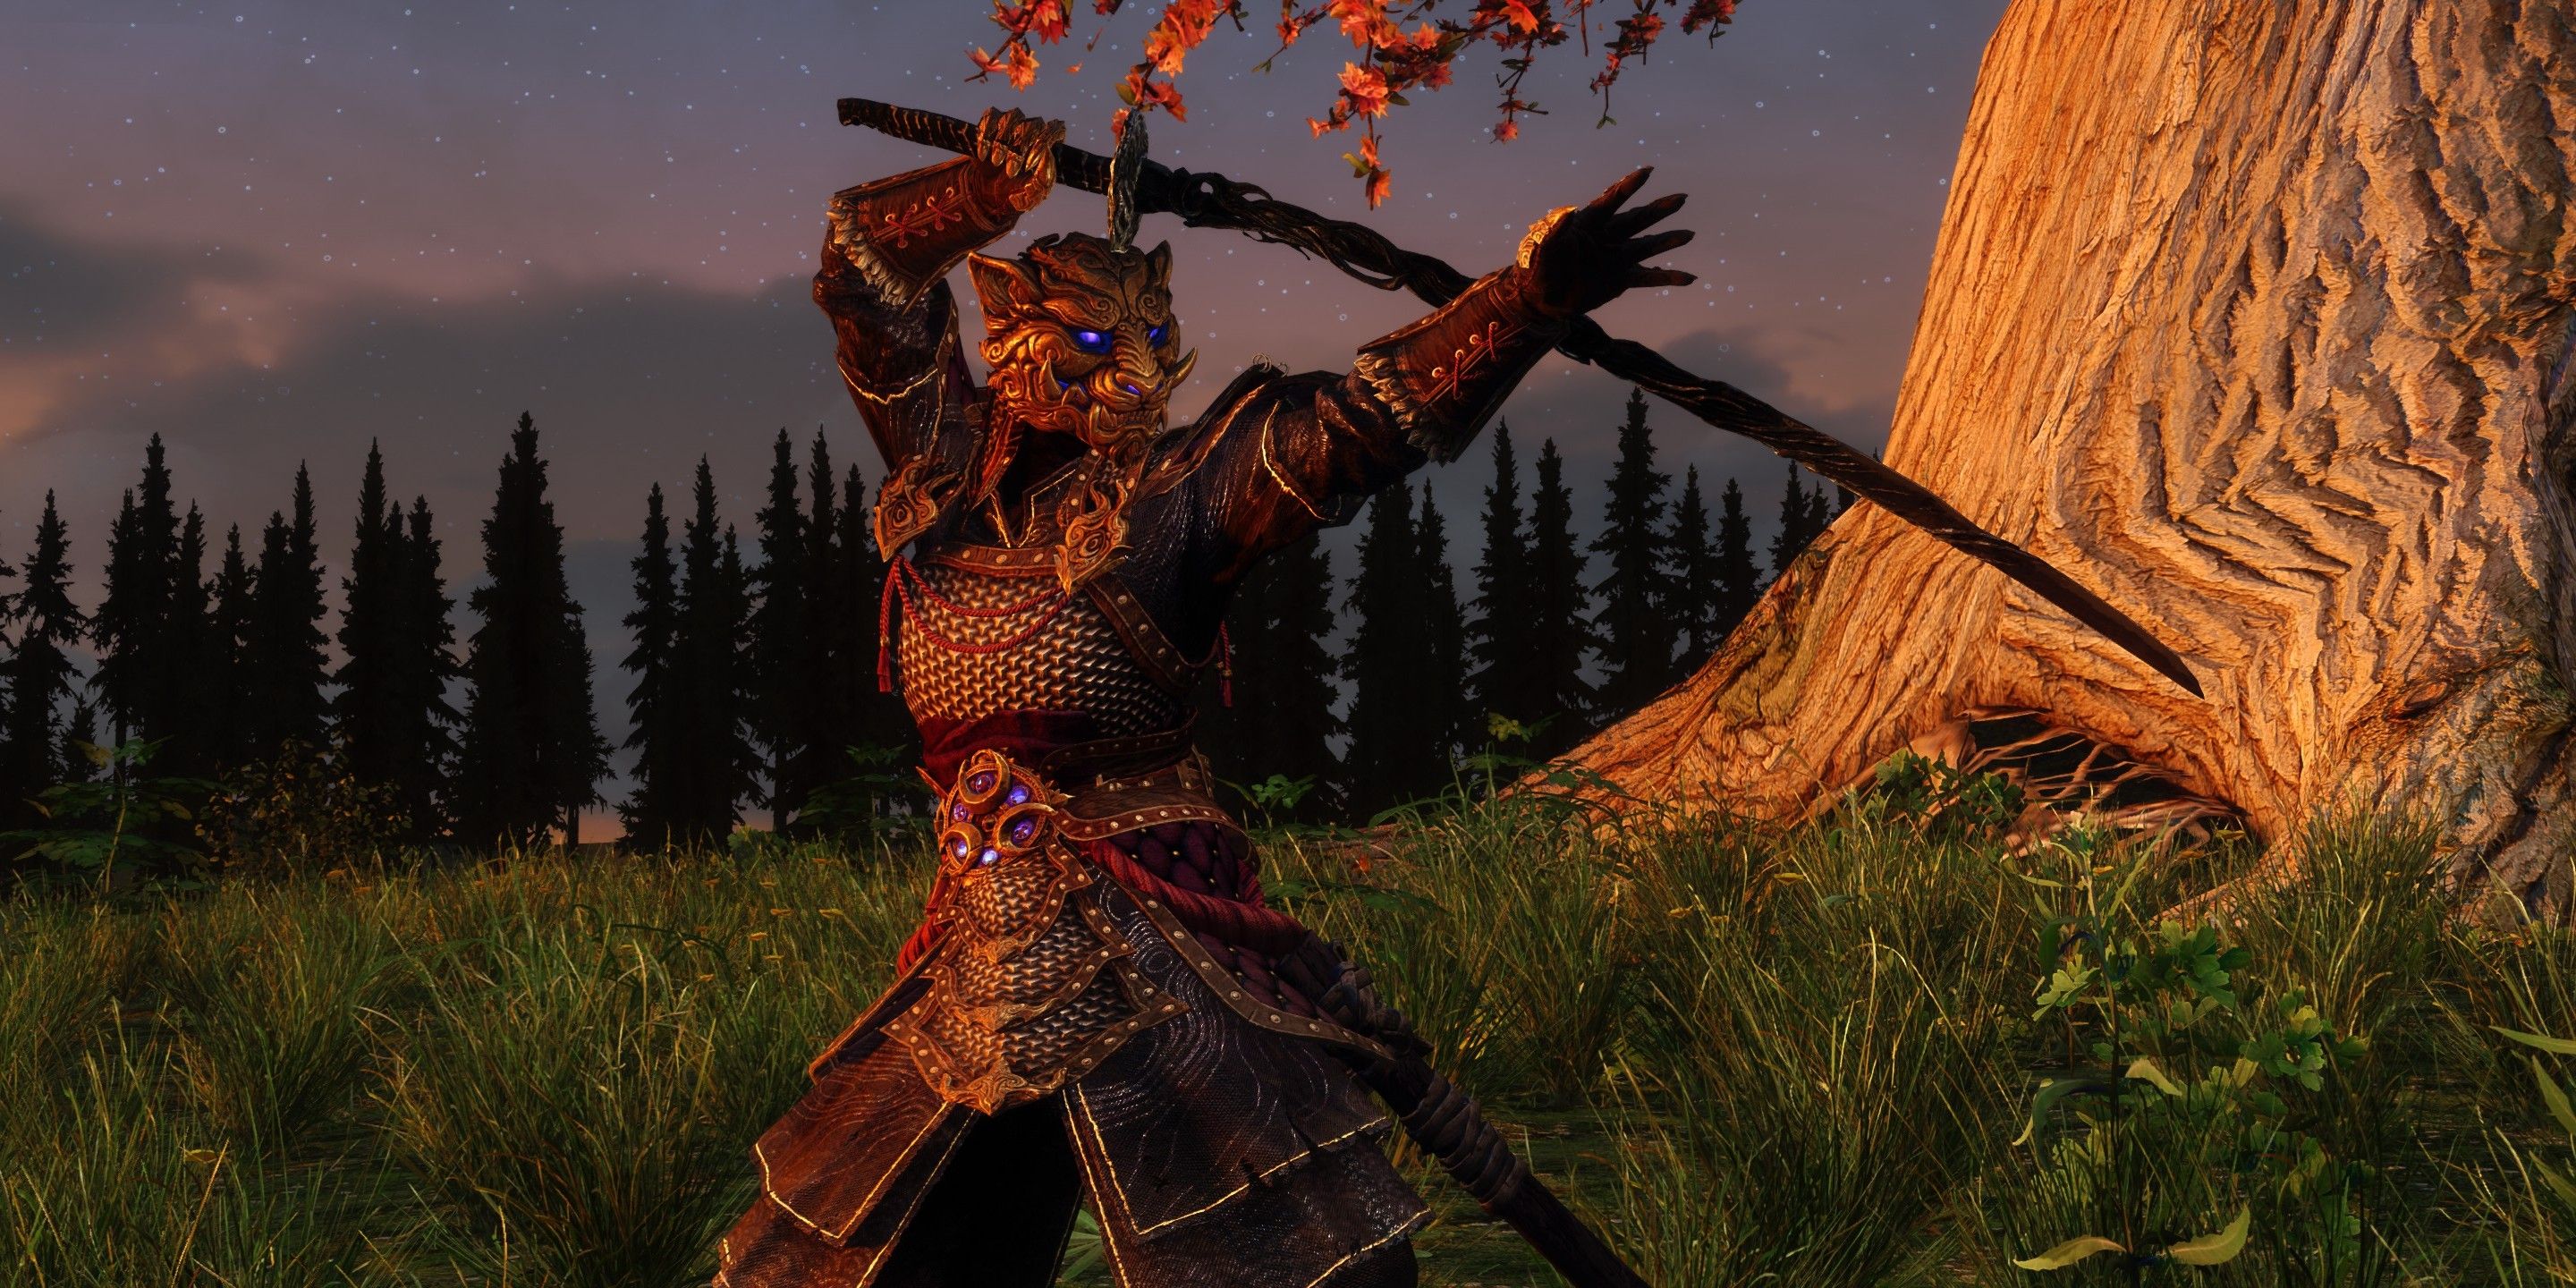 Skyrim Mod Gives You Intricate Khajiit Armour, And You Don't Even Need Coin